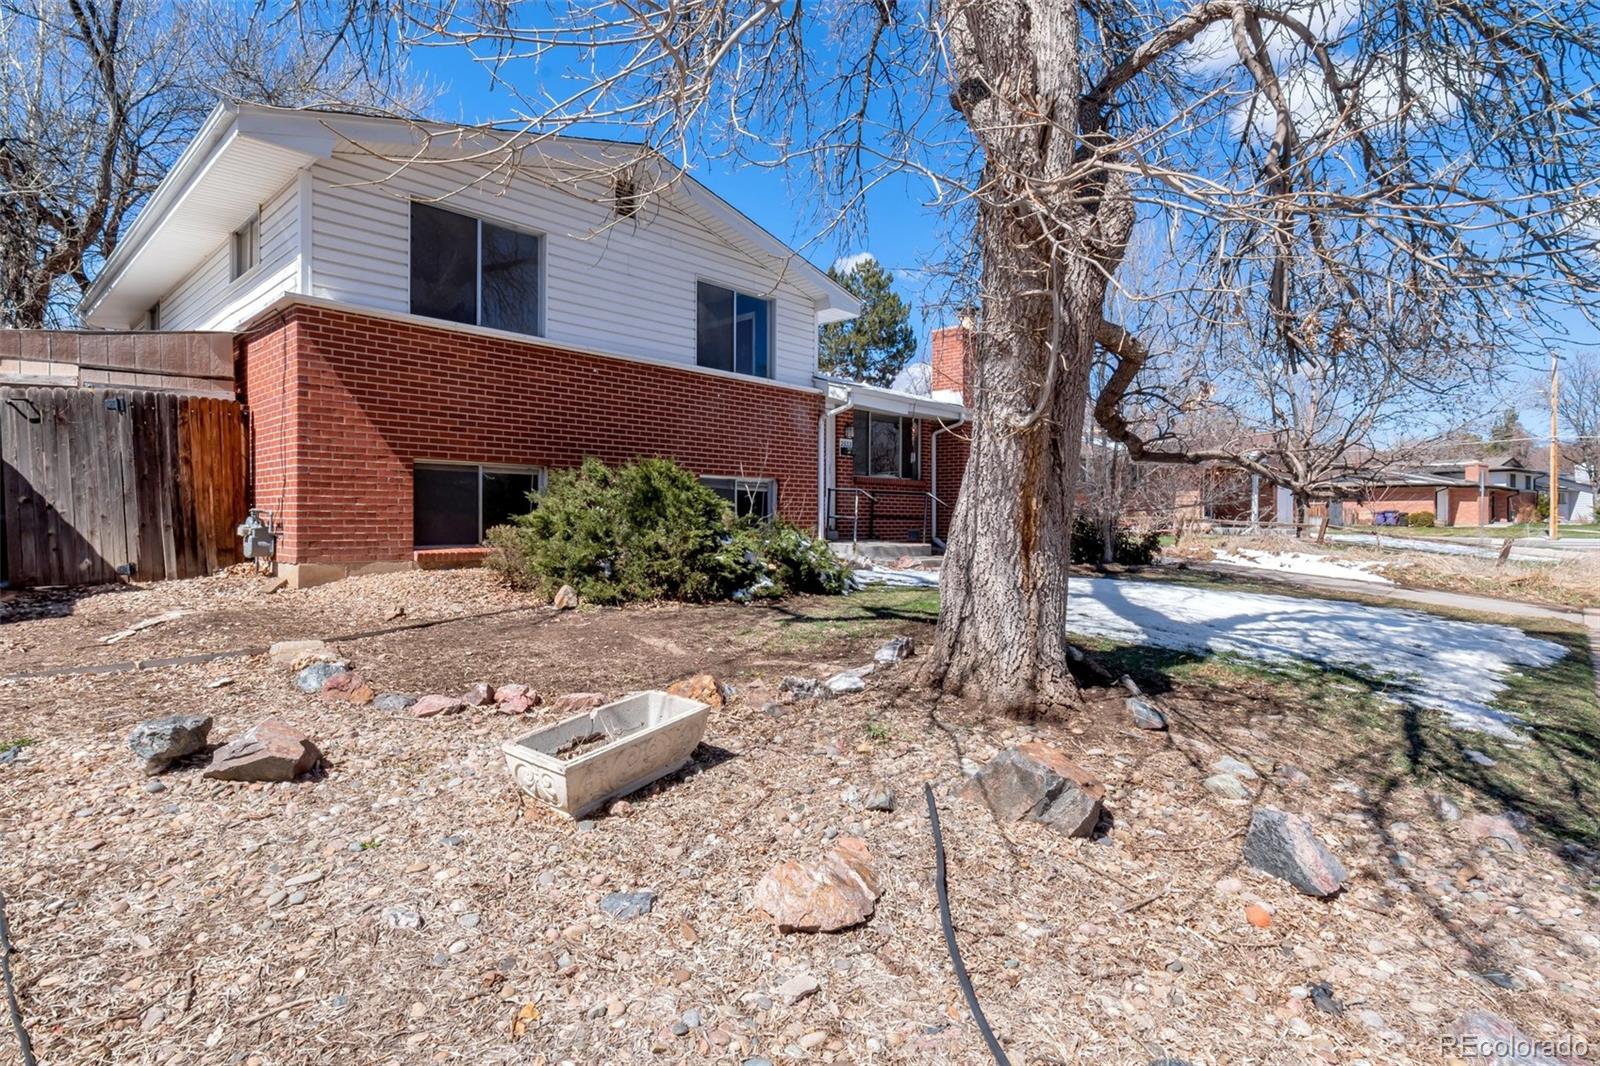 2933 s ivan way, Denver sold home. Closed on 2024-04-18 for $471,000.